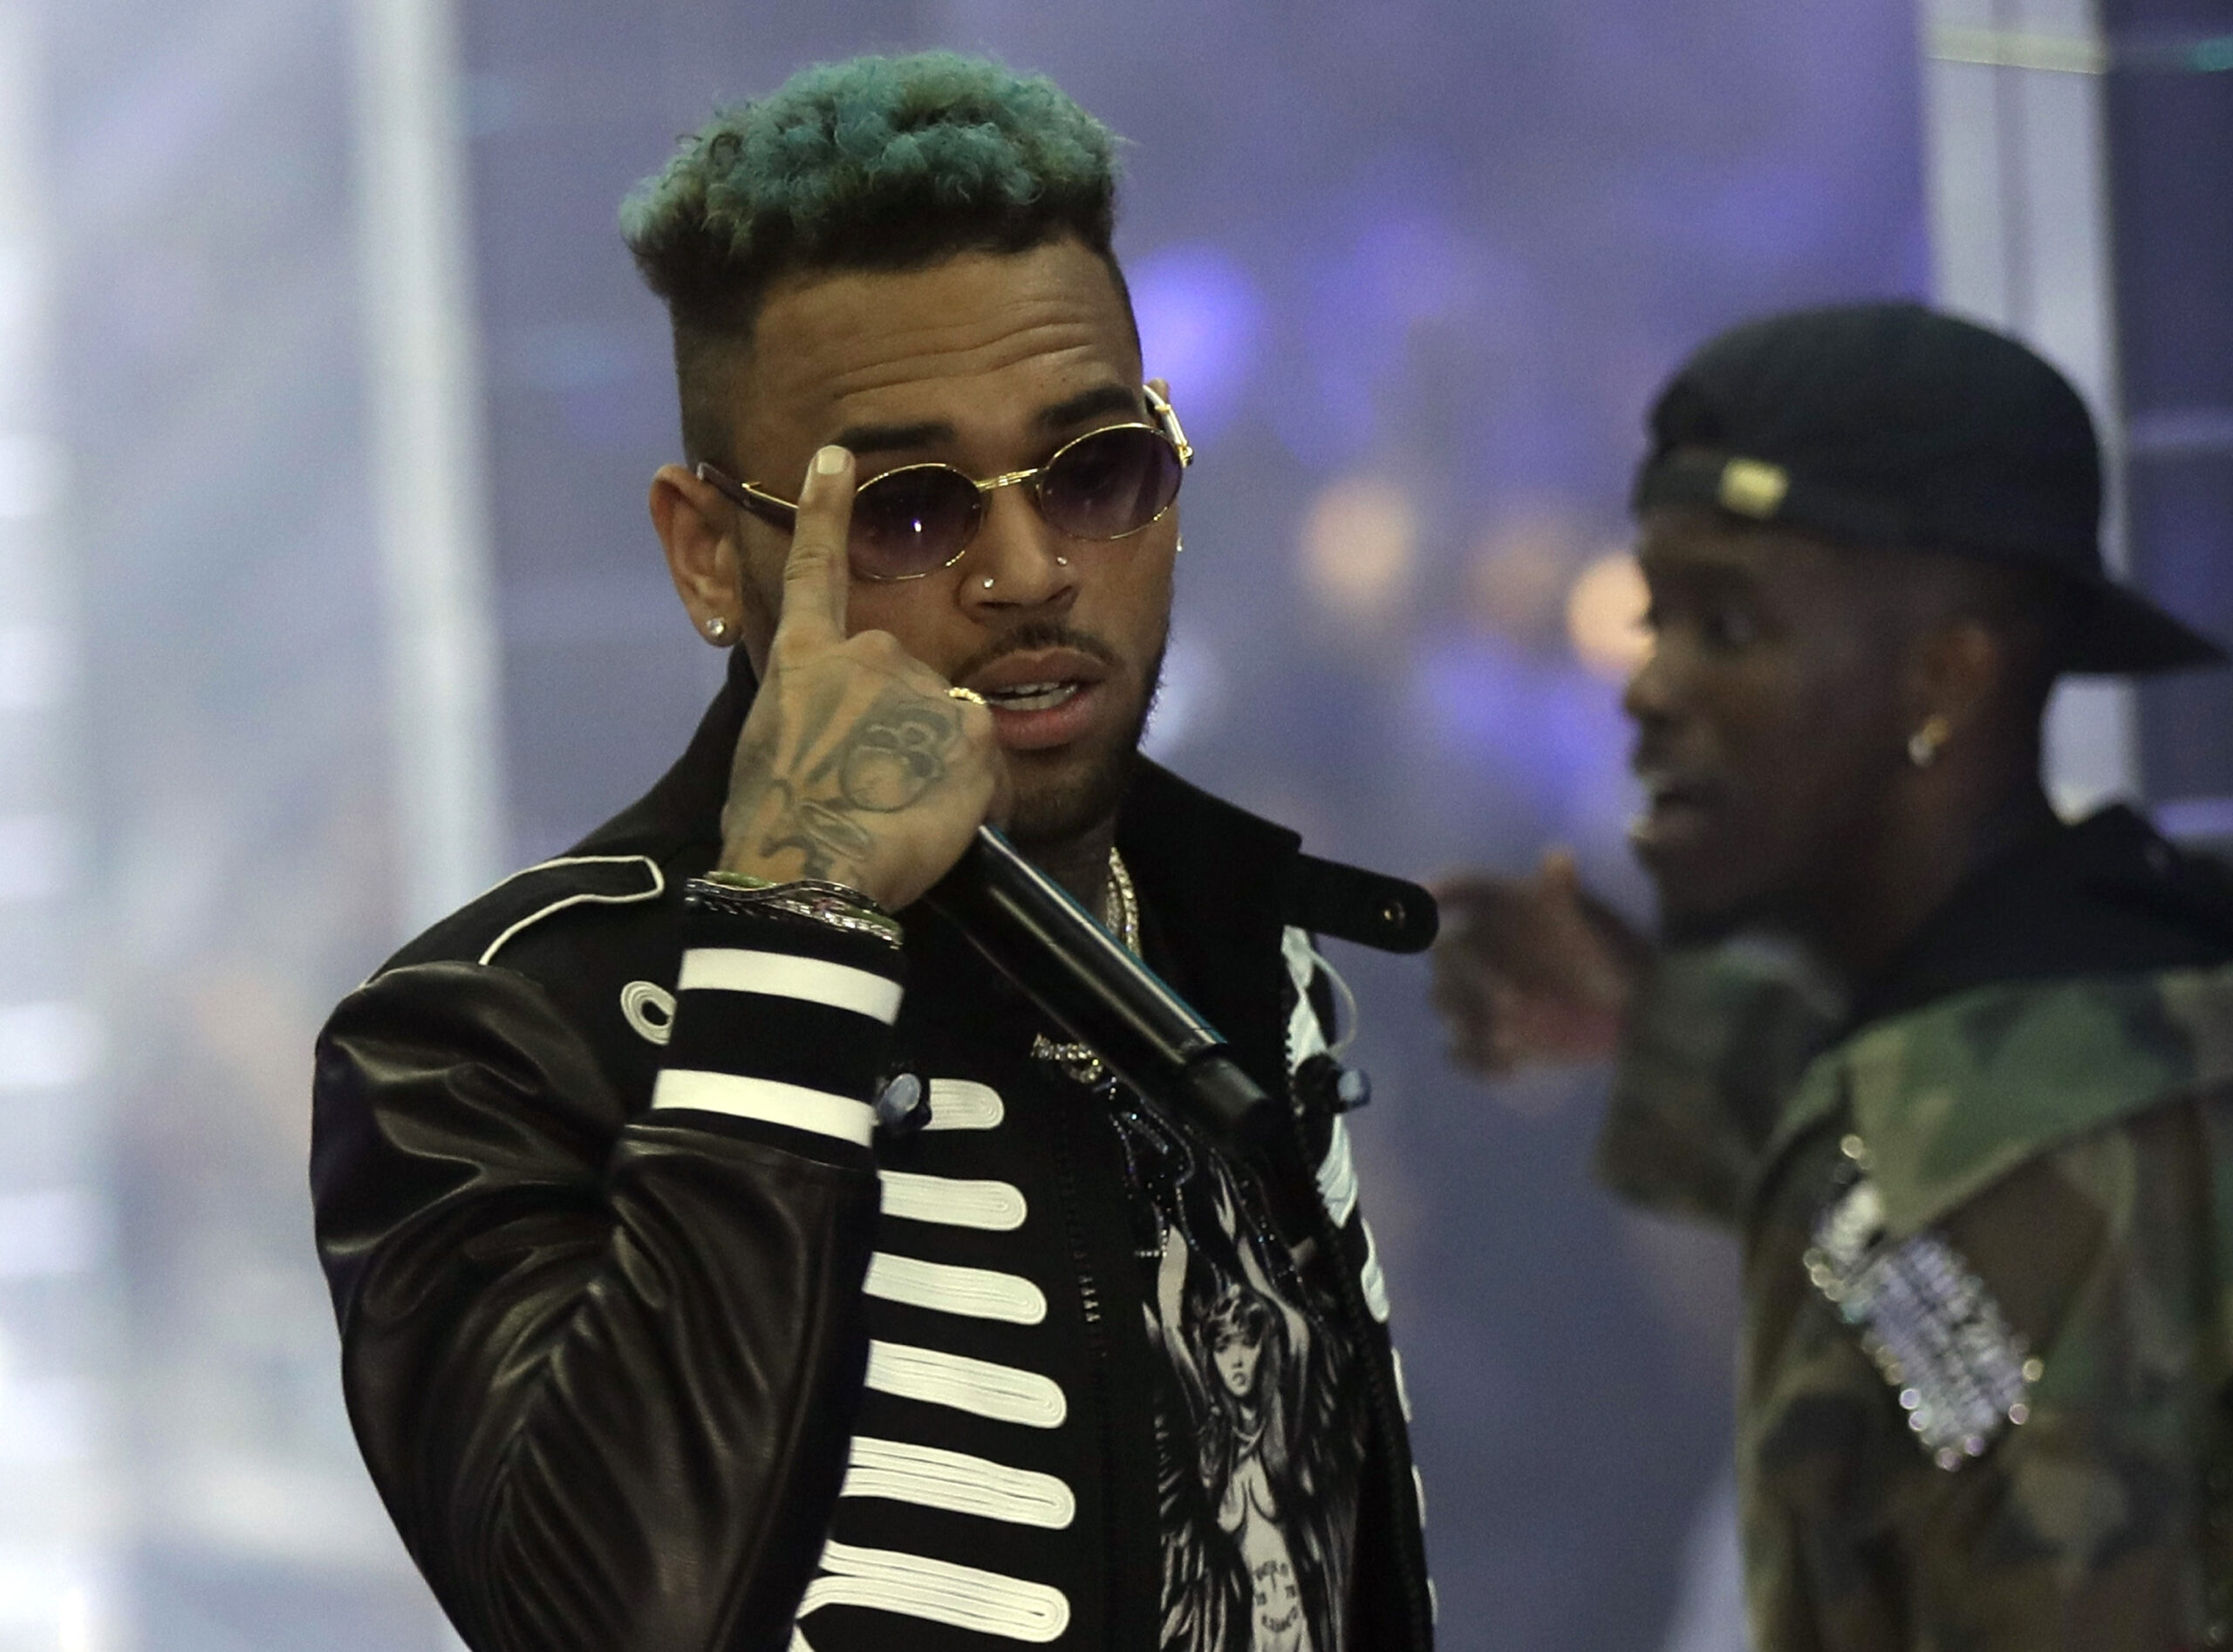 FILE - In this Sept.21, 2018 file photo, singer Chris Brown performs during Philipp Plein's women's 2019 Spring-Summer collection, unveiled during the Fashion Week in Milan, Italy. Two police officials say U.S. singer Chris Brown and two other people are in custody in Paris after a woman filed a rape complaint. (AP Photo/Luca Bruno, File)